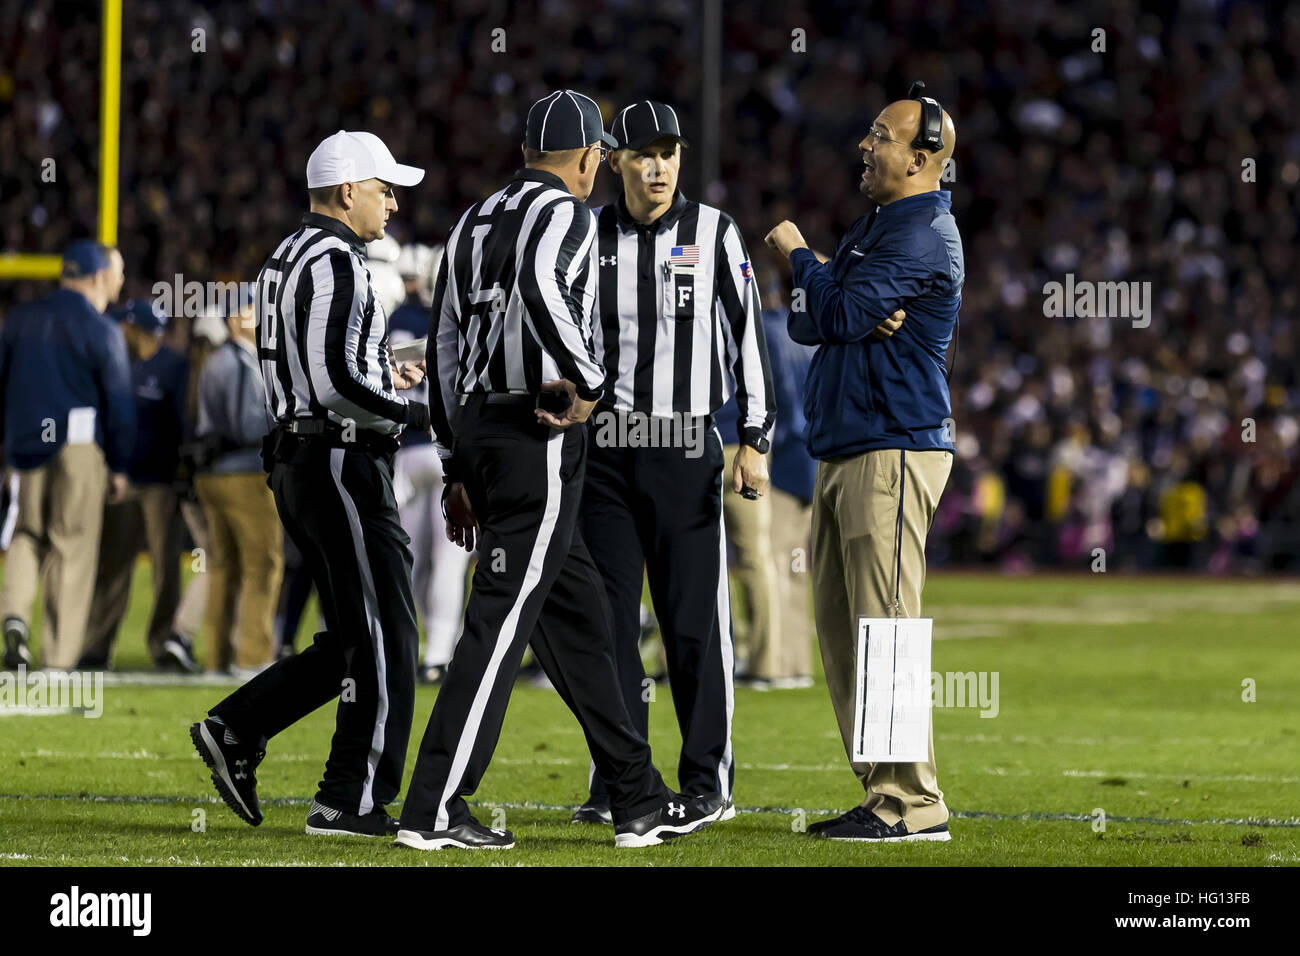 California, USA. 2nd Jan, 2017.  Penn State head coach James Franklin not happy with penalty calls in the second half during the Rose Bowl Game between Penn State Nittany Lions and University of Southern California Trojans at Rose Bowl Stadium in Pasadena, California. USC won 52-49. © Scott Taetsch/ZUMA Wire/Alamy Live News Stock Photo